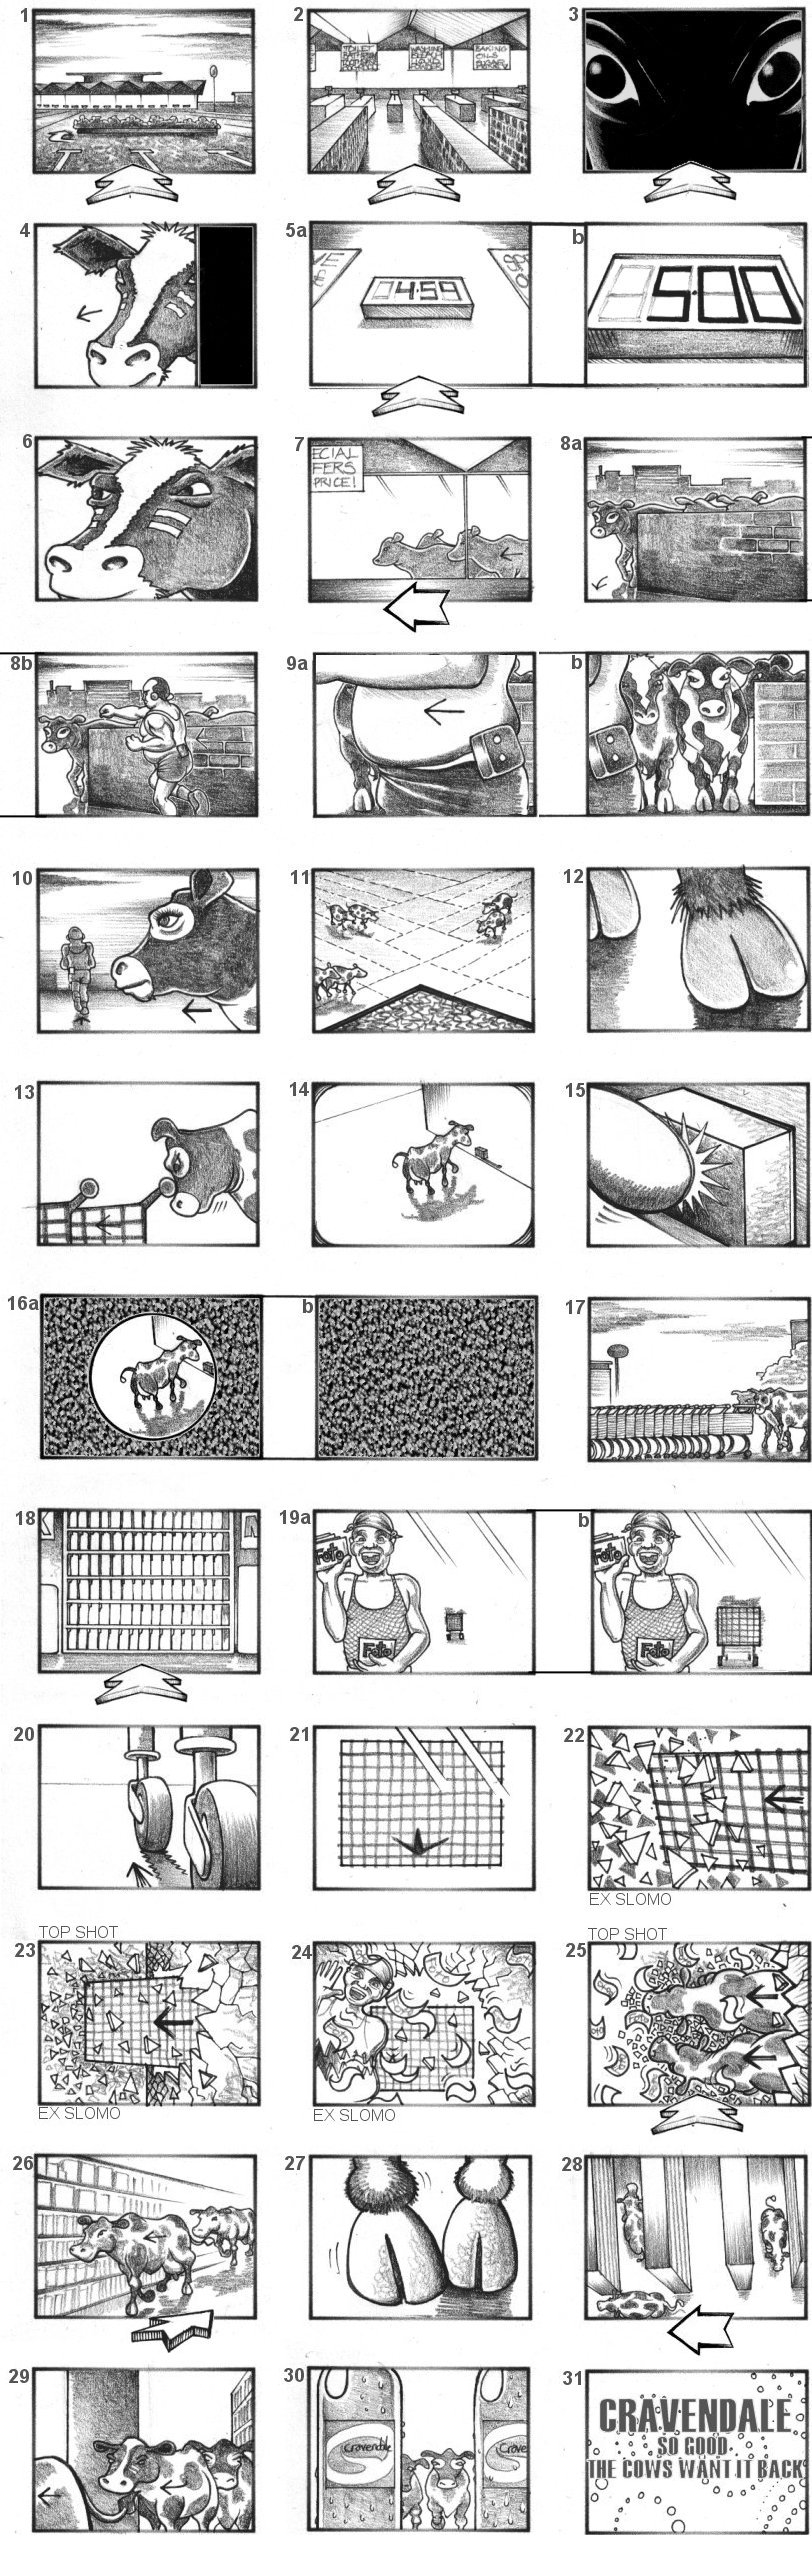 CRAVENDALE MILK STORYBOARDS BY ANDY SPARROW